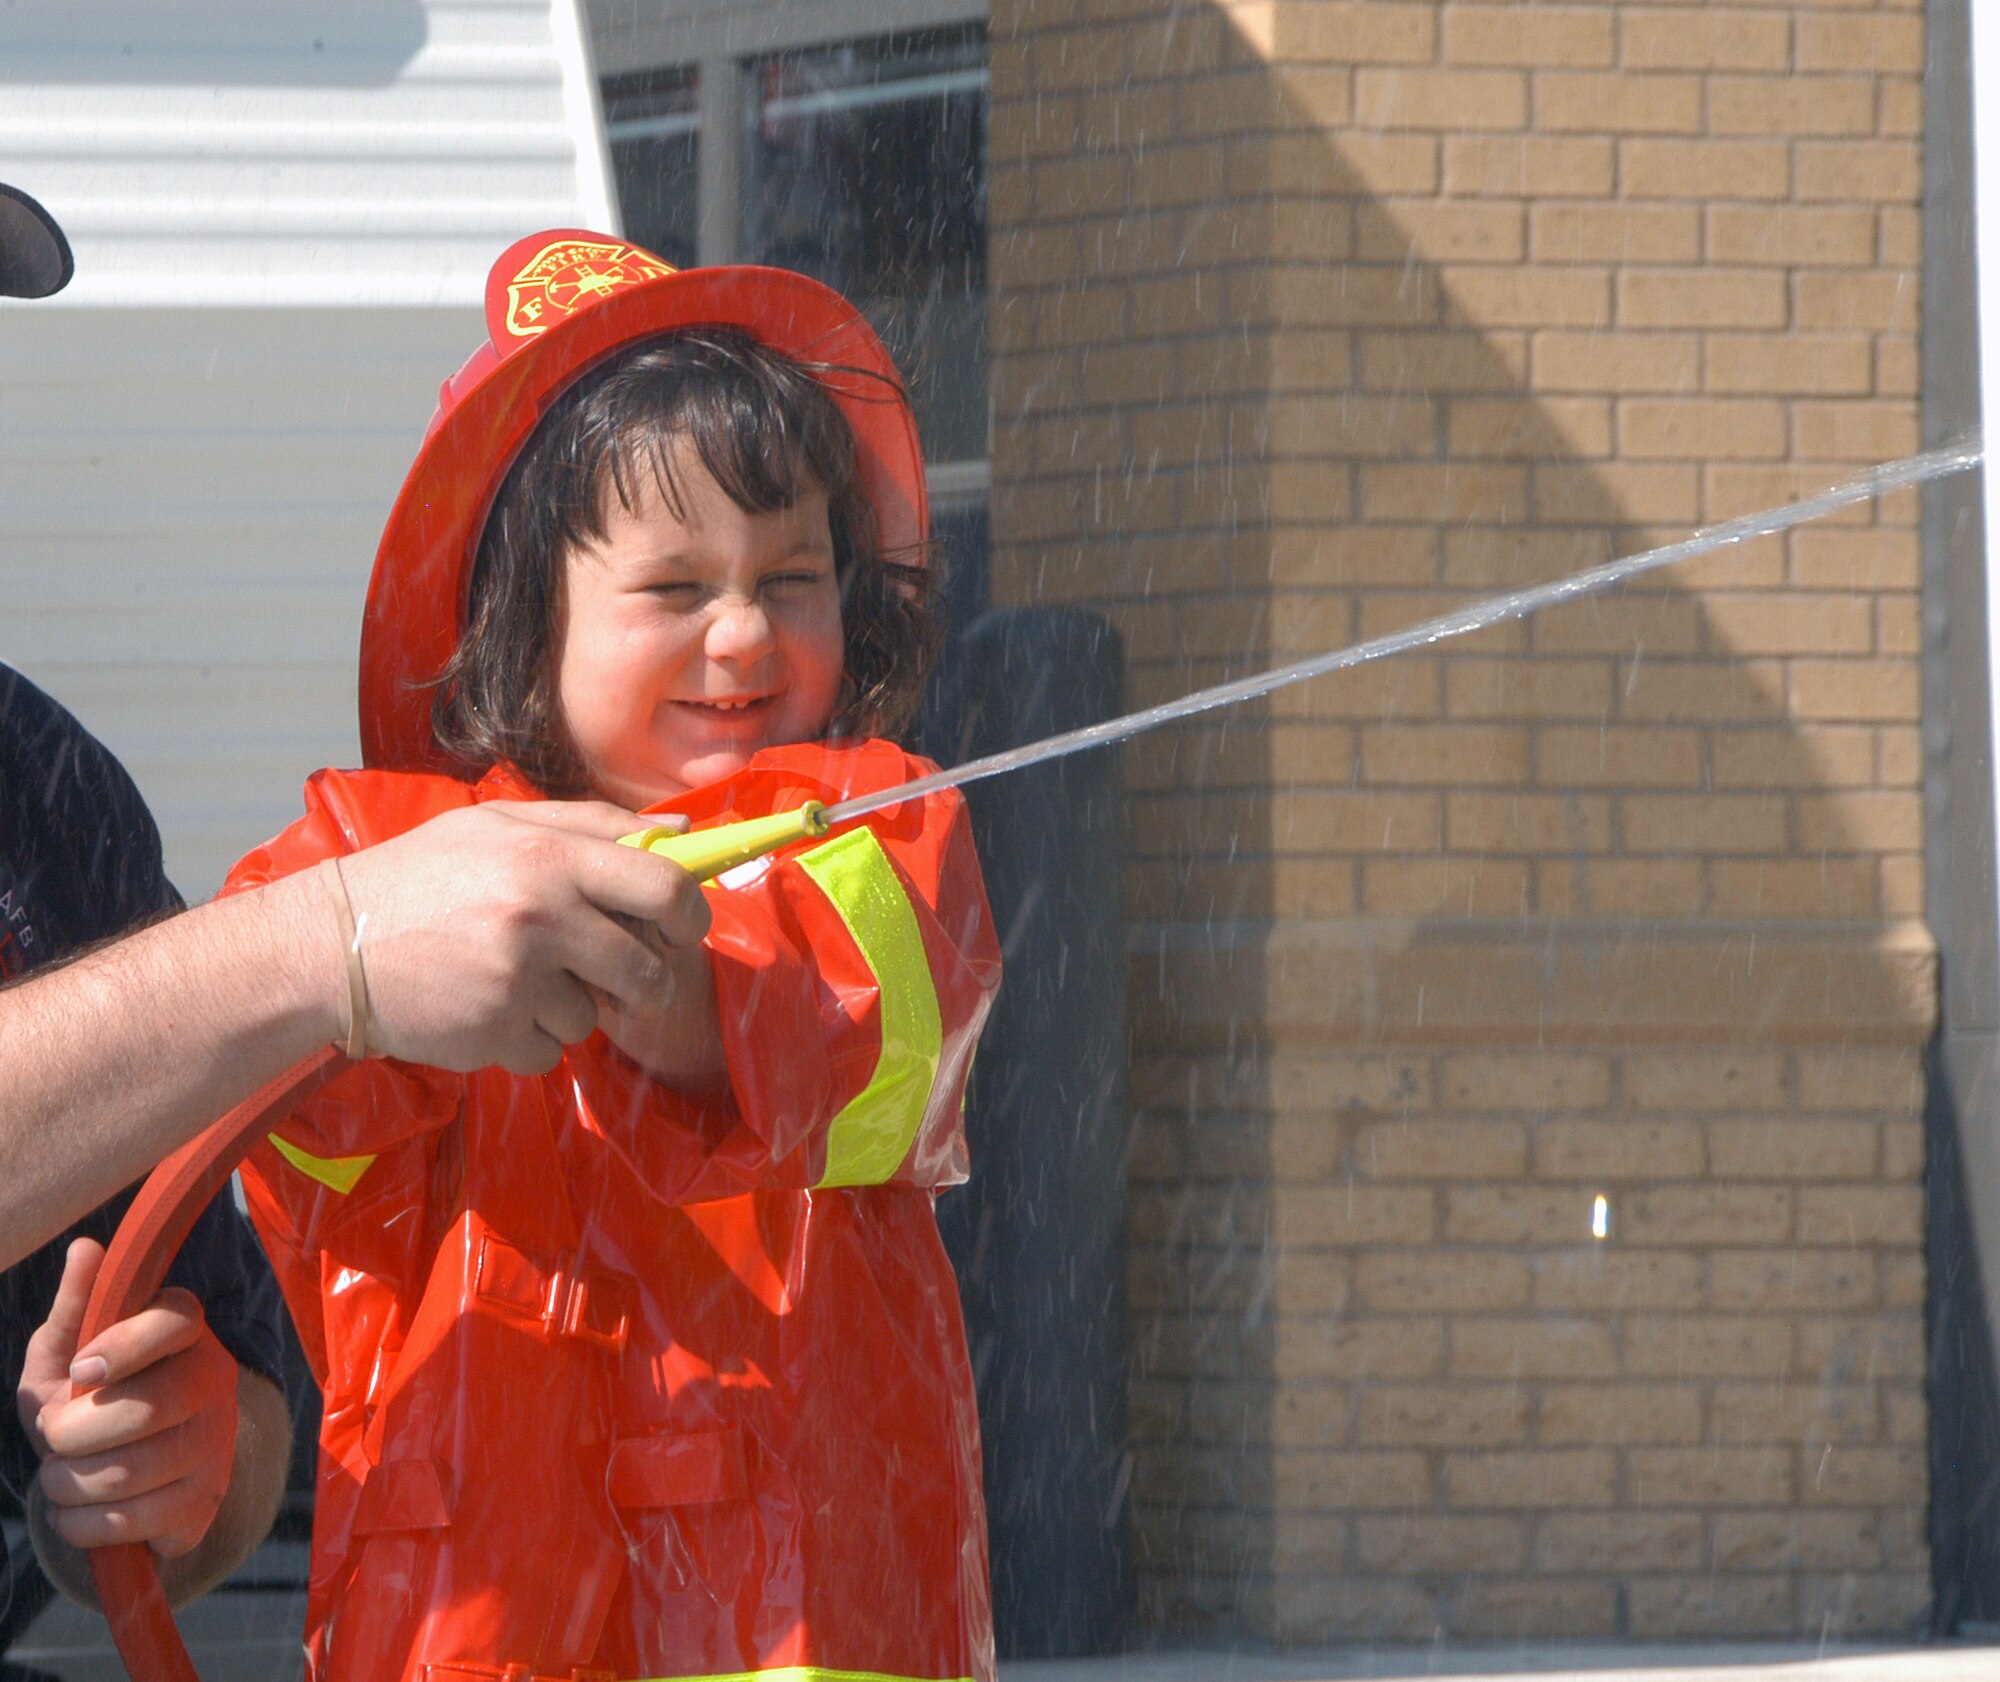 OFFUTT AIR FORCE BASE, Neb. -- Joseaphine Thomas, the three year old daughter of Staff Sgt. Heather Thomas, radiology technician, gets a little wet putting out a simulated fire at a children’s firehouse on display to help understand the feeling of firefighter’s duties. There were various exercises offered to encourage children to respect and understand fire and smoke including a smokehouse that simulated a fire in a child’s home during the 2008 Offutt Firestation Open House Oct. 11. (U.S. Air Force Photo By Jeff Gates)                                                                                                                                                                                                                                                                      